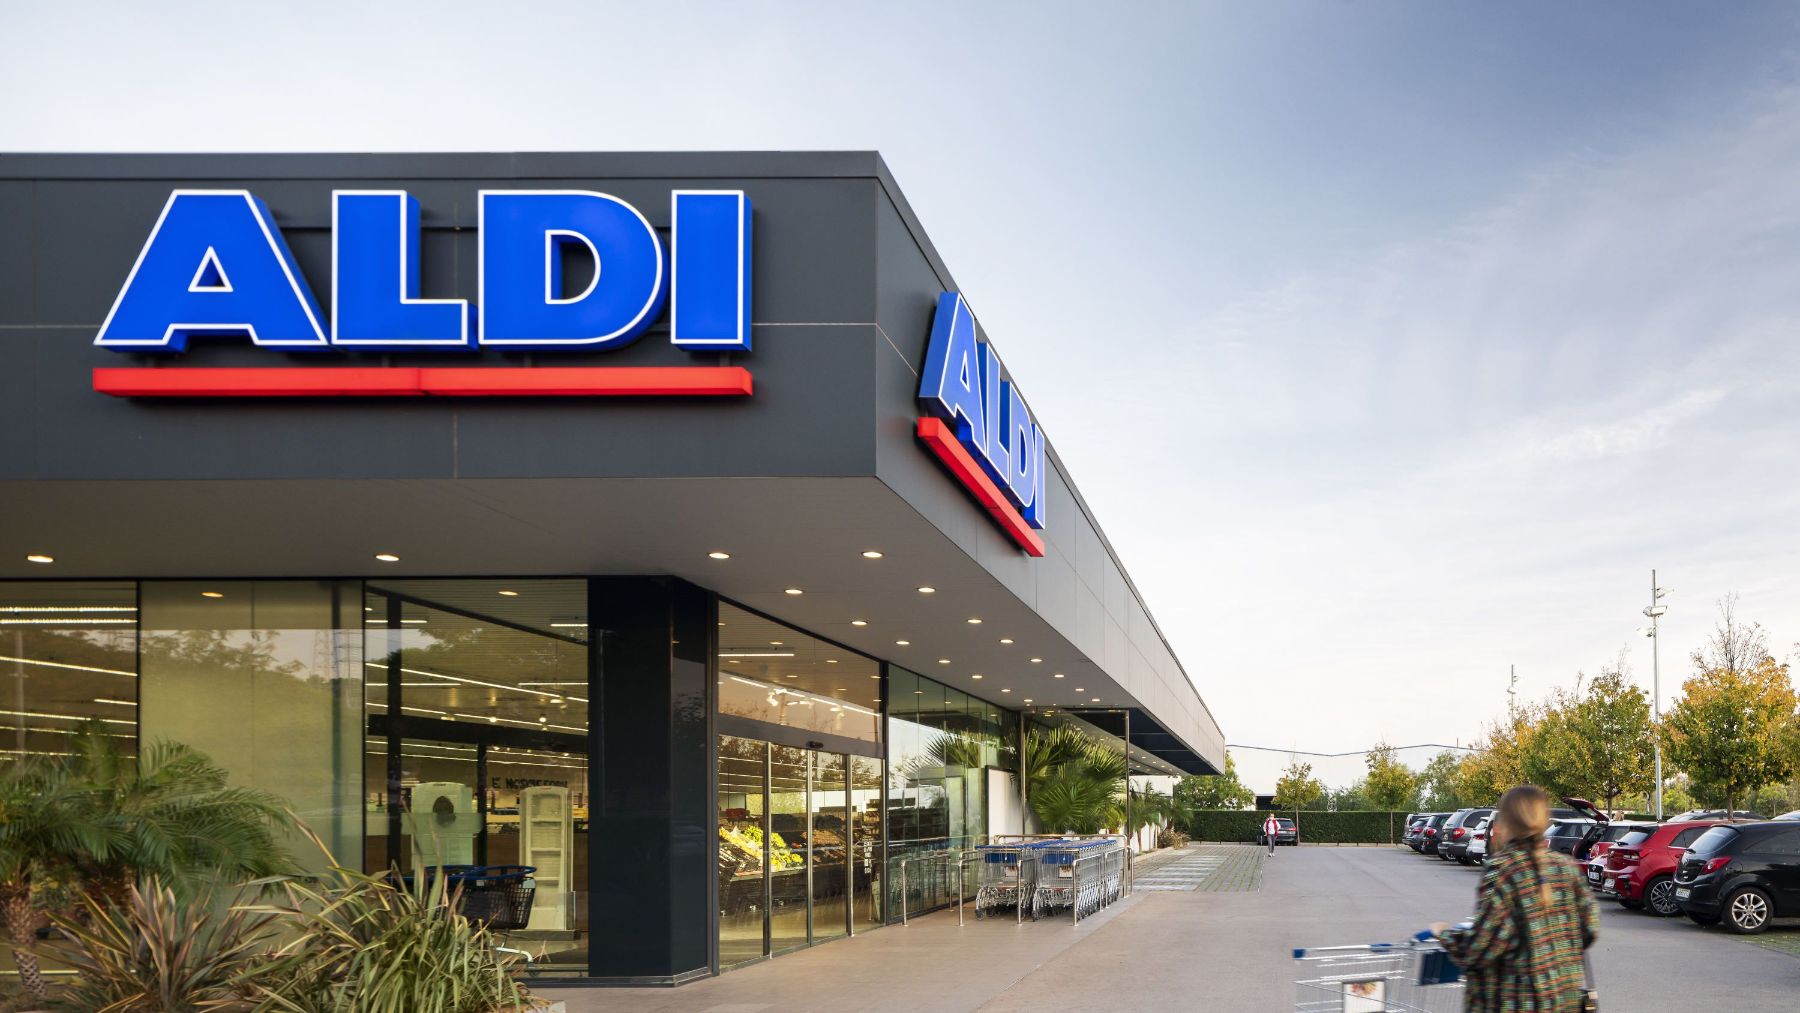 Aldi recalls a popular product from its supermarkets and orders its immediate return